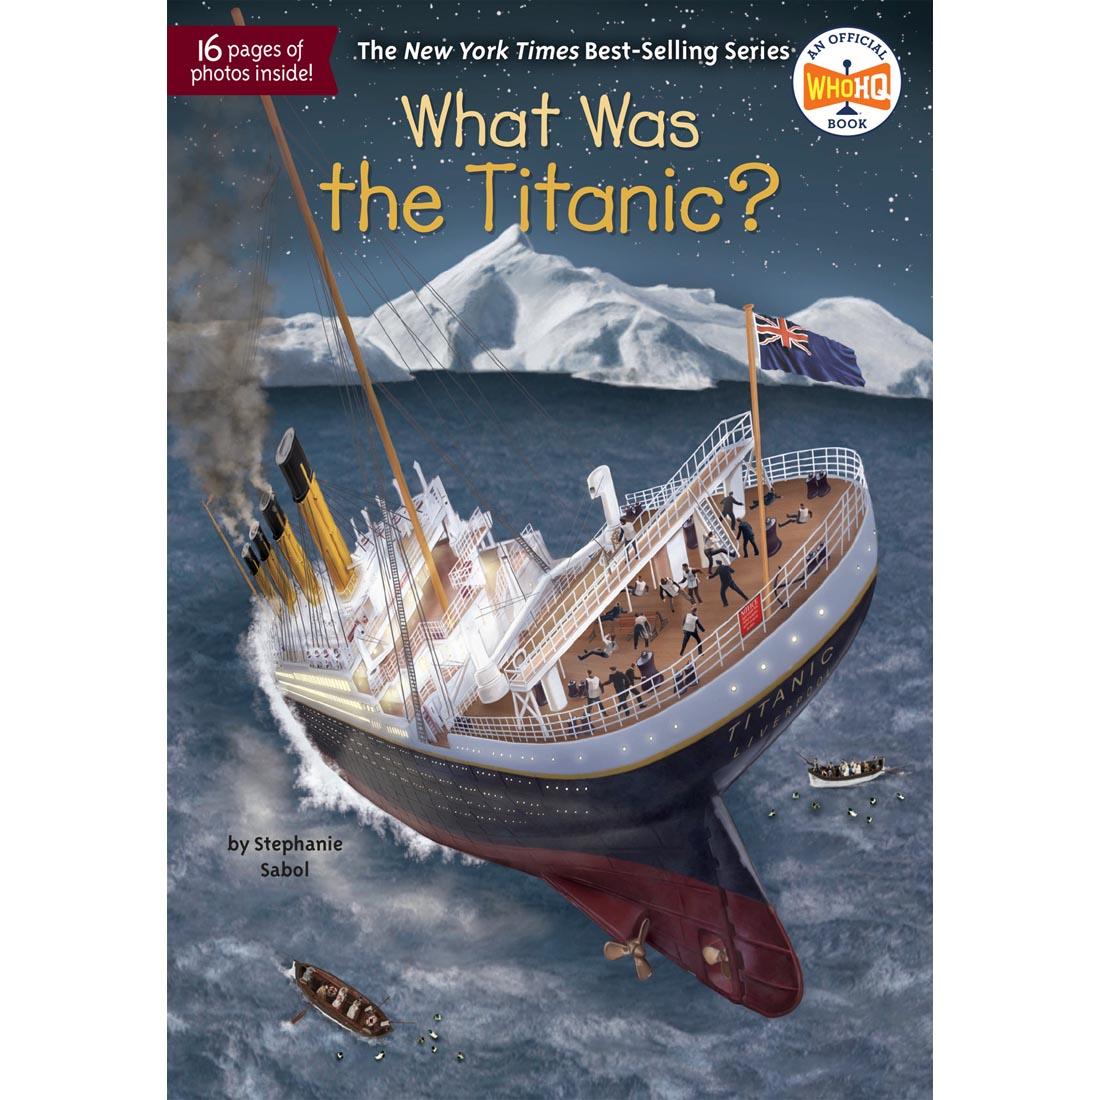 What Was The Titanic? Book